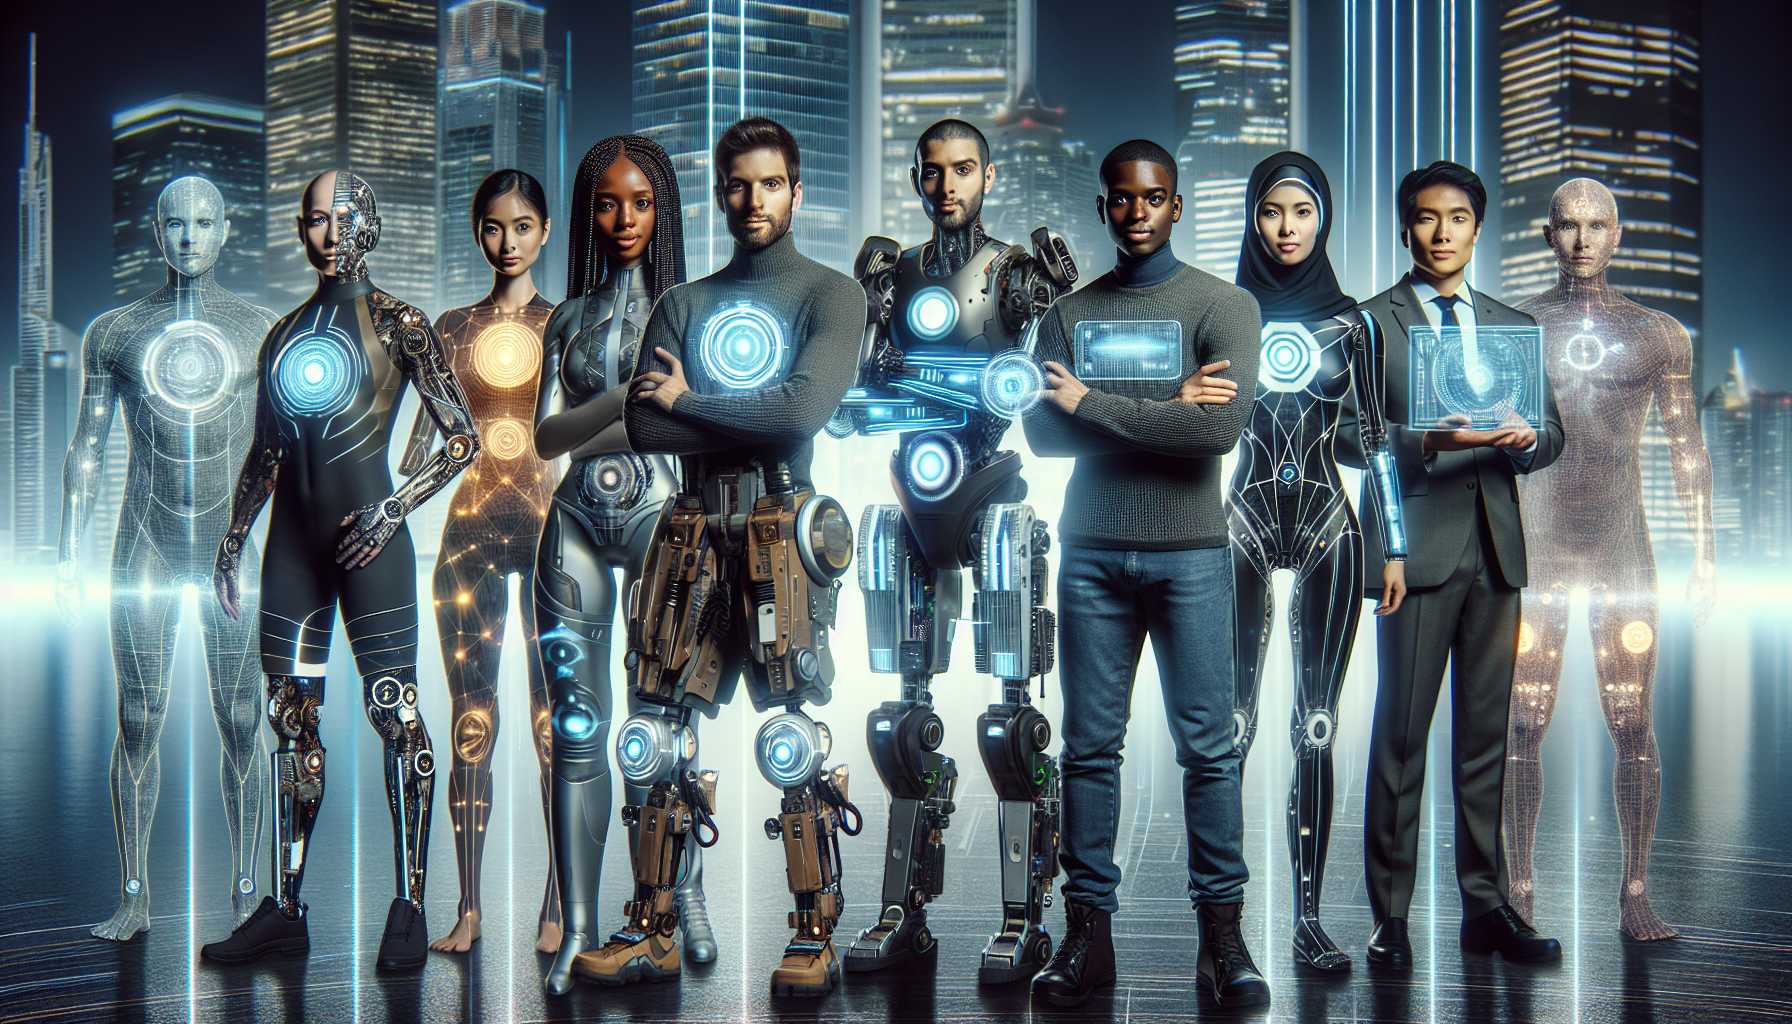 Group of humans augmented with technological gear